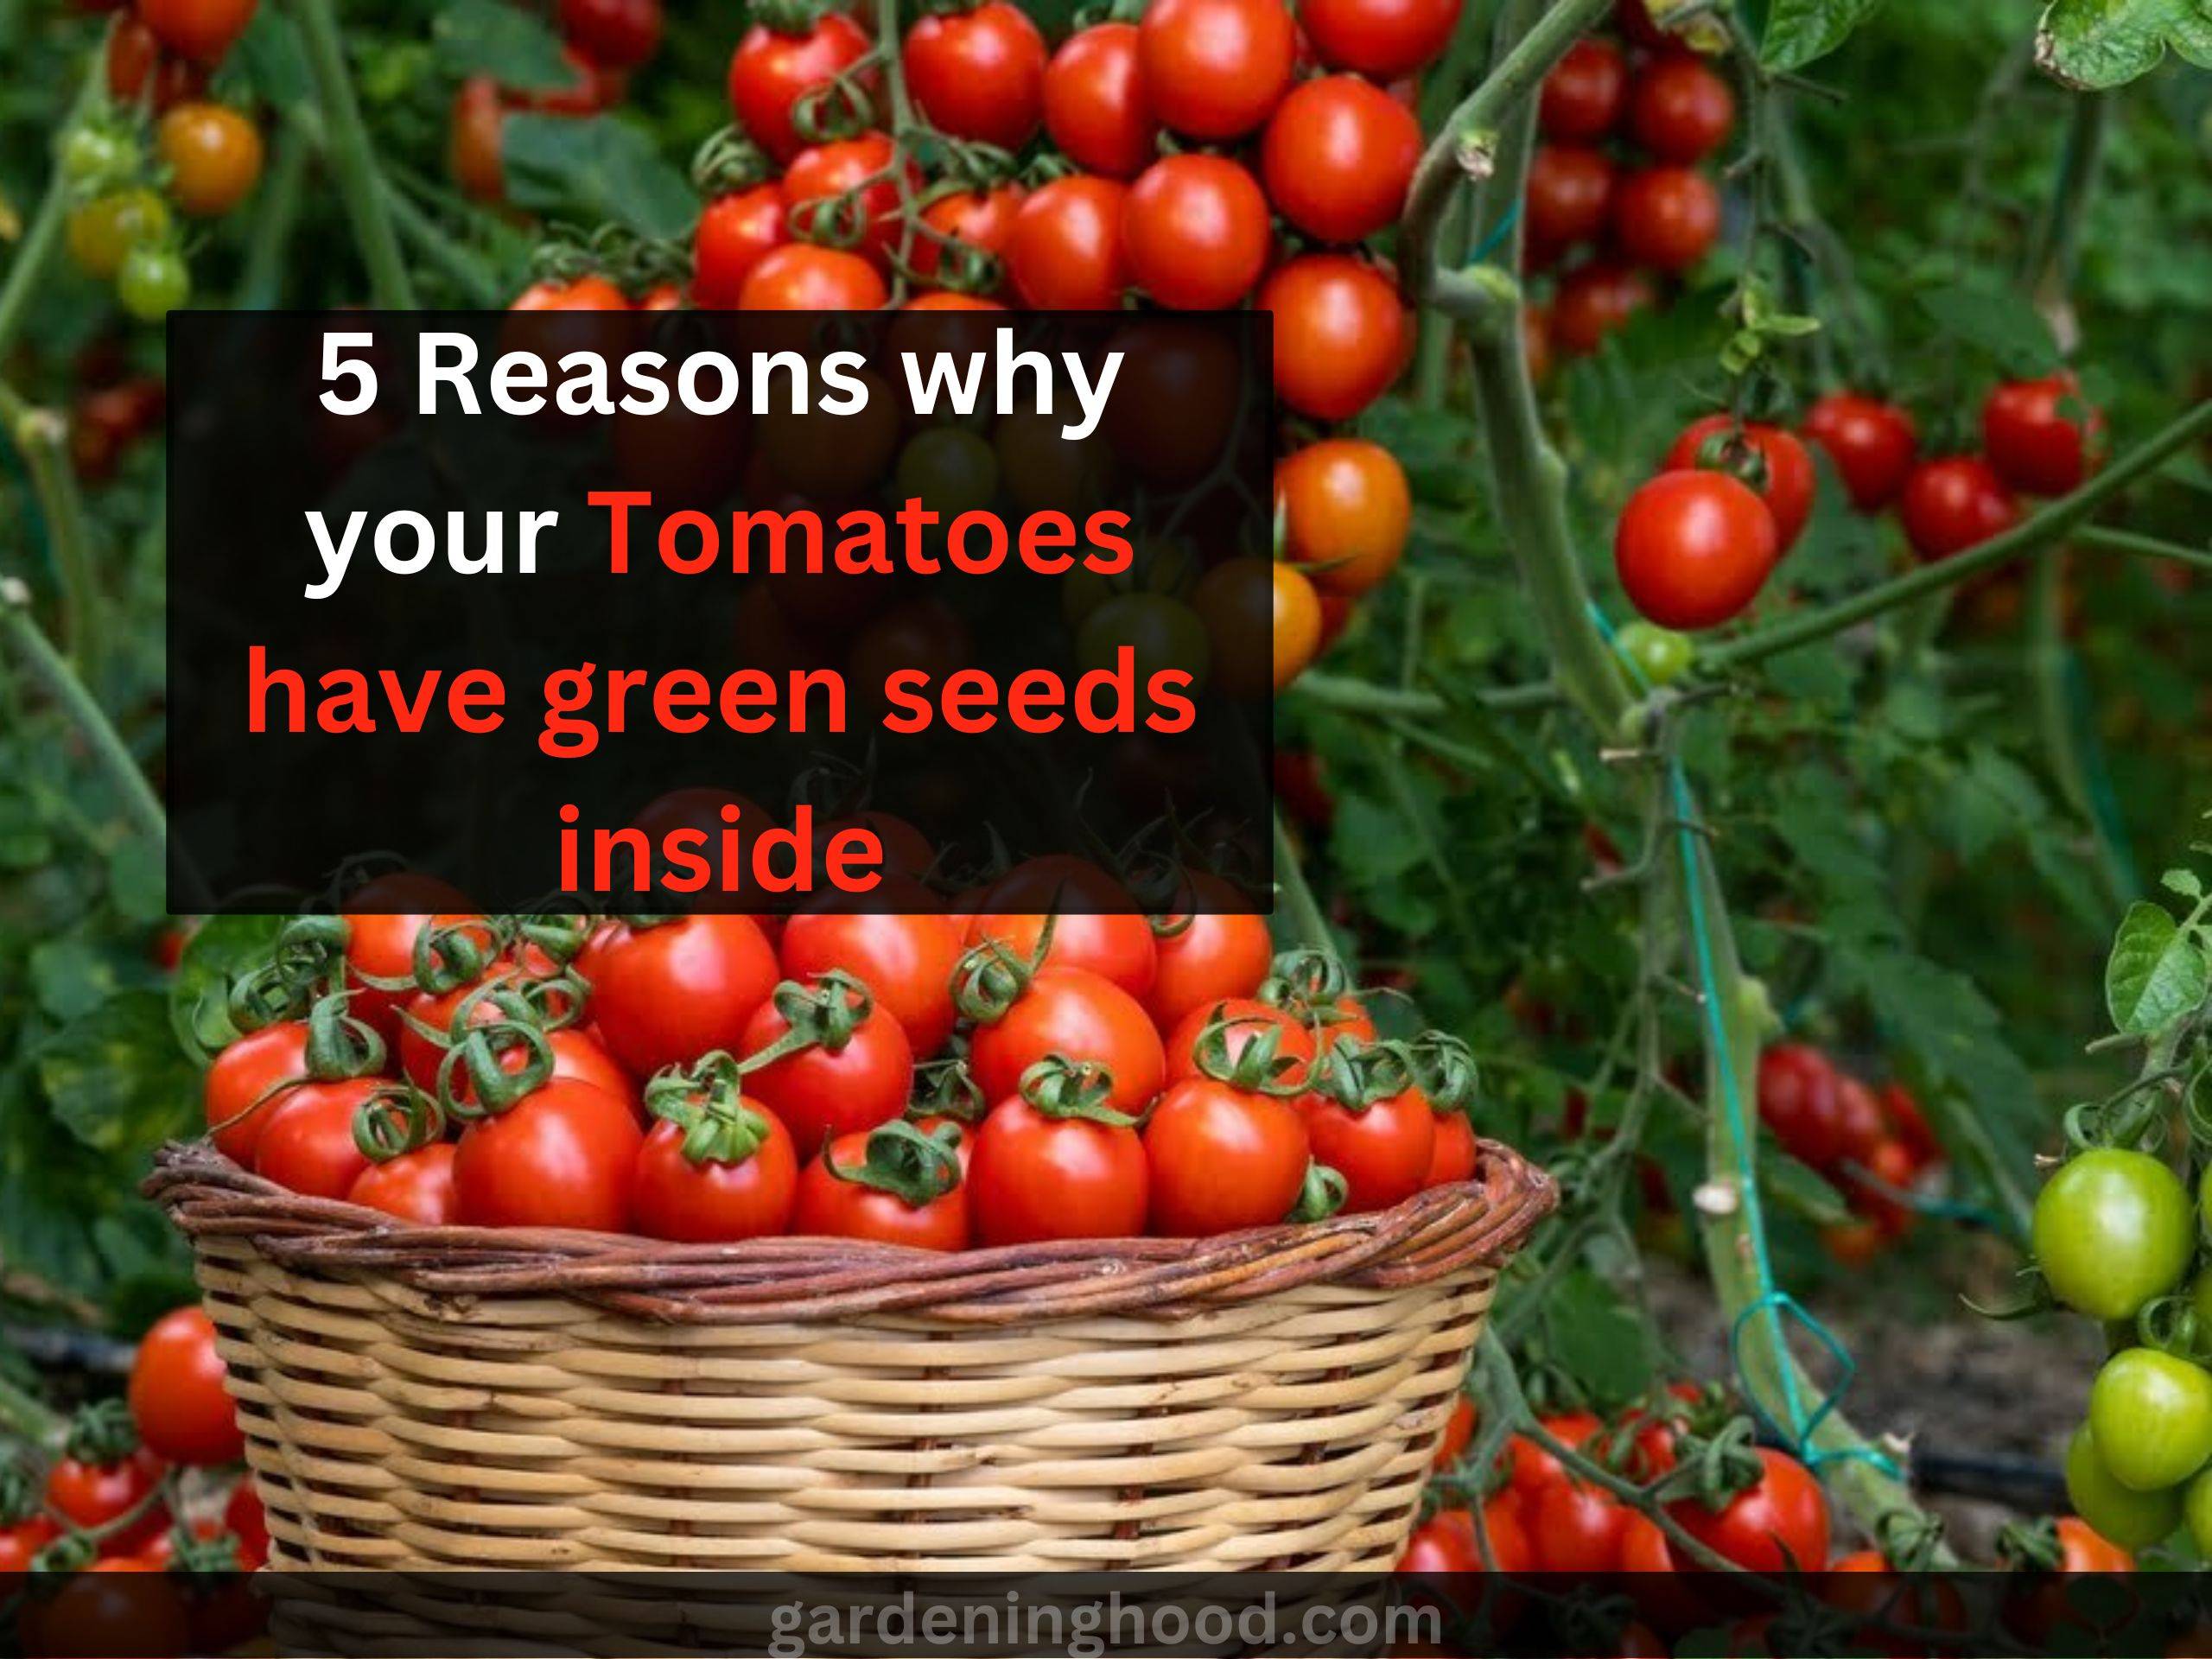 5 Reasons why your Tomatoes have green seeds inside